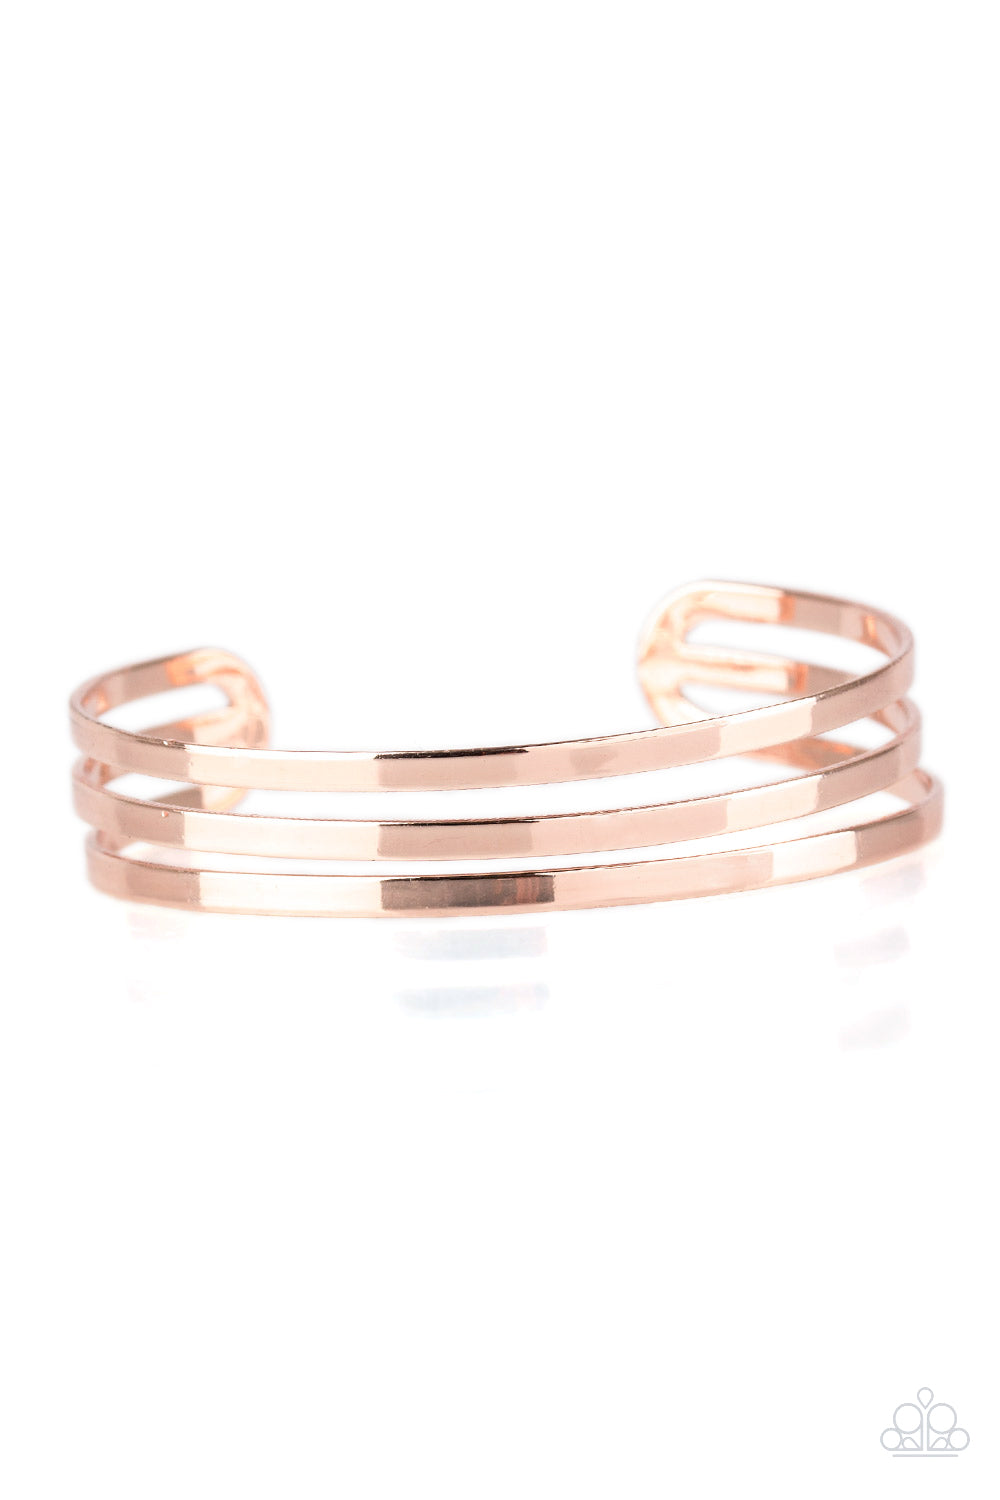 shop-sassy-affordable- street-sleek-rose-gold-paparazzi-accessories